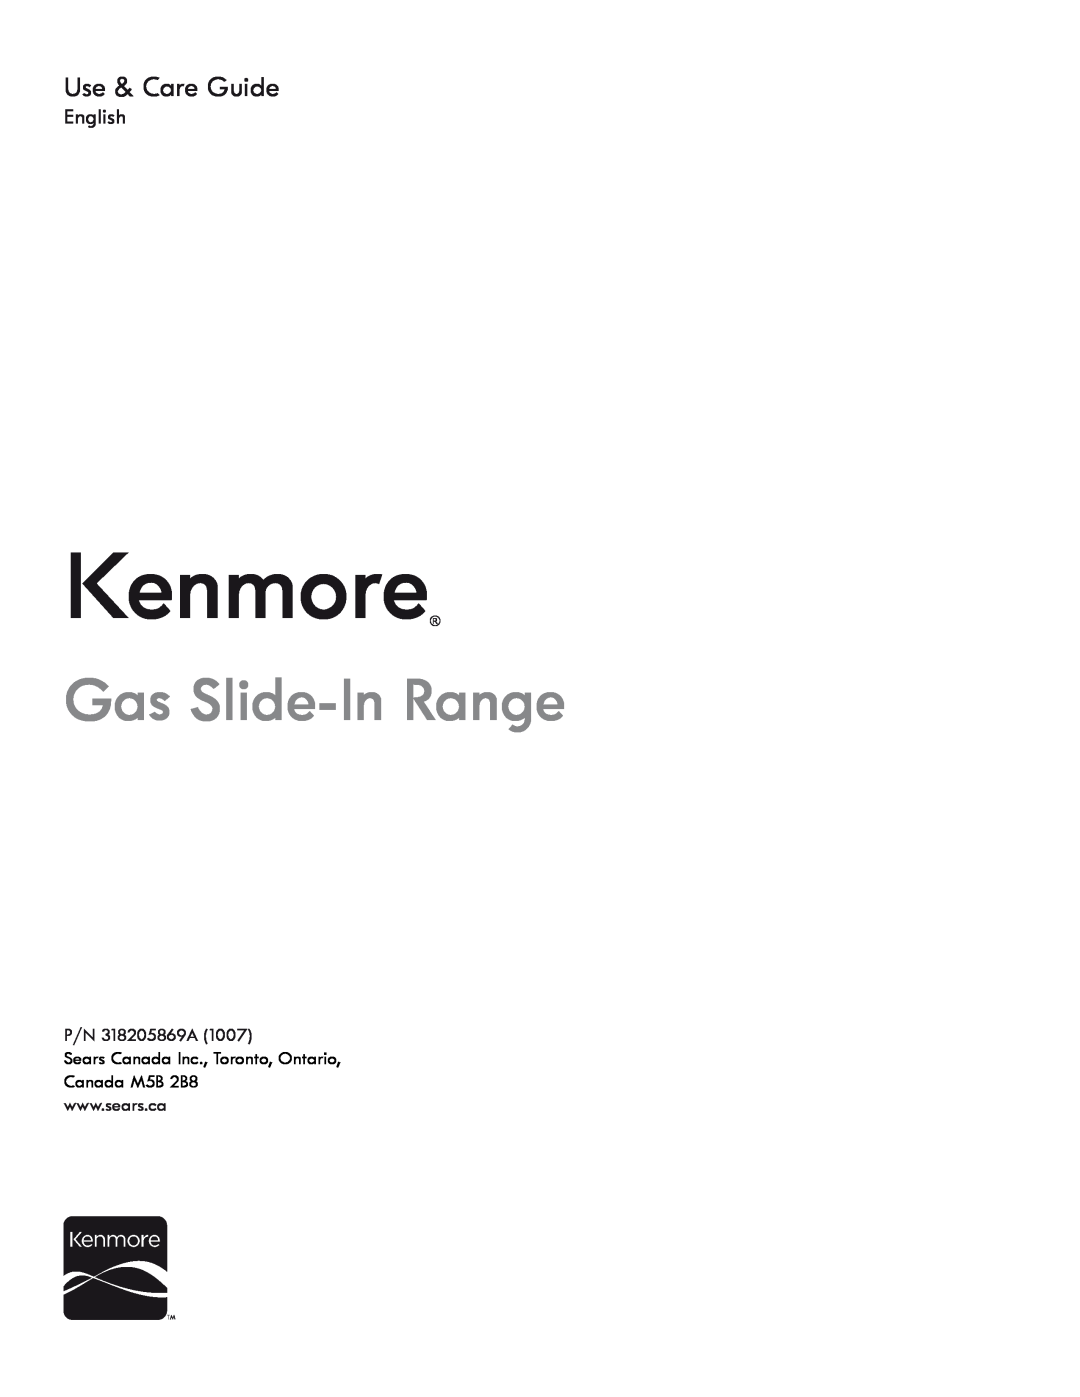 Kenmore 318205869A manual Kenmore, Use & Care Guide, Gas Slide-In Range, English 